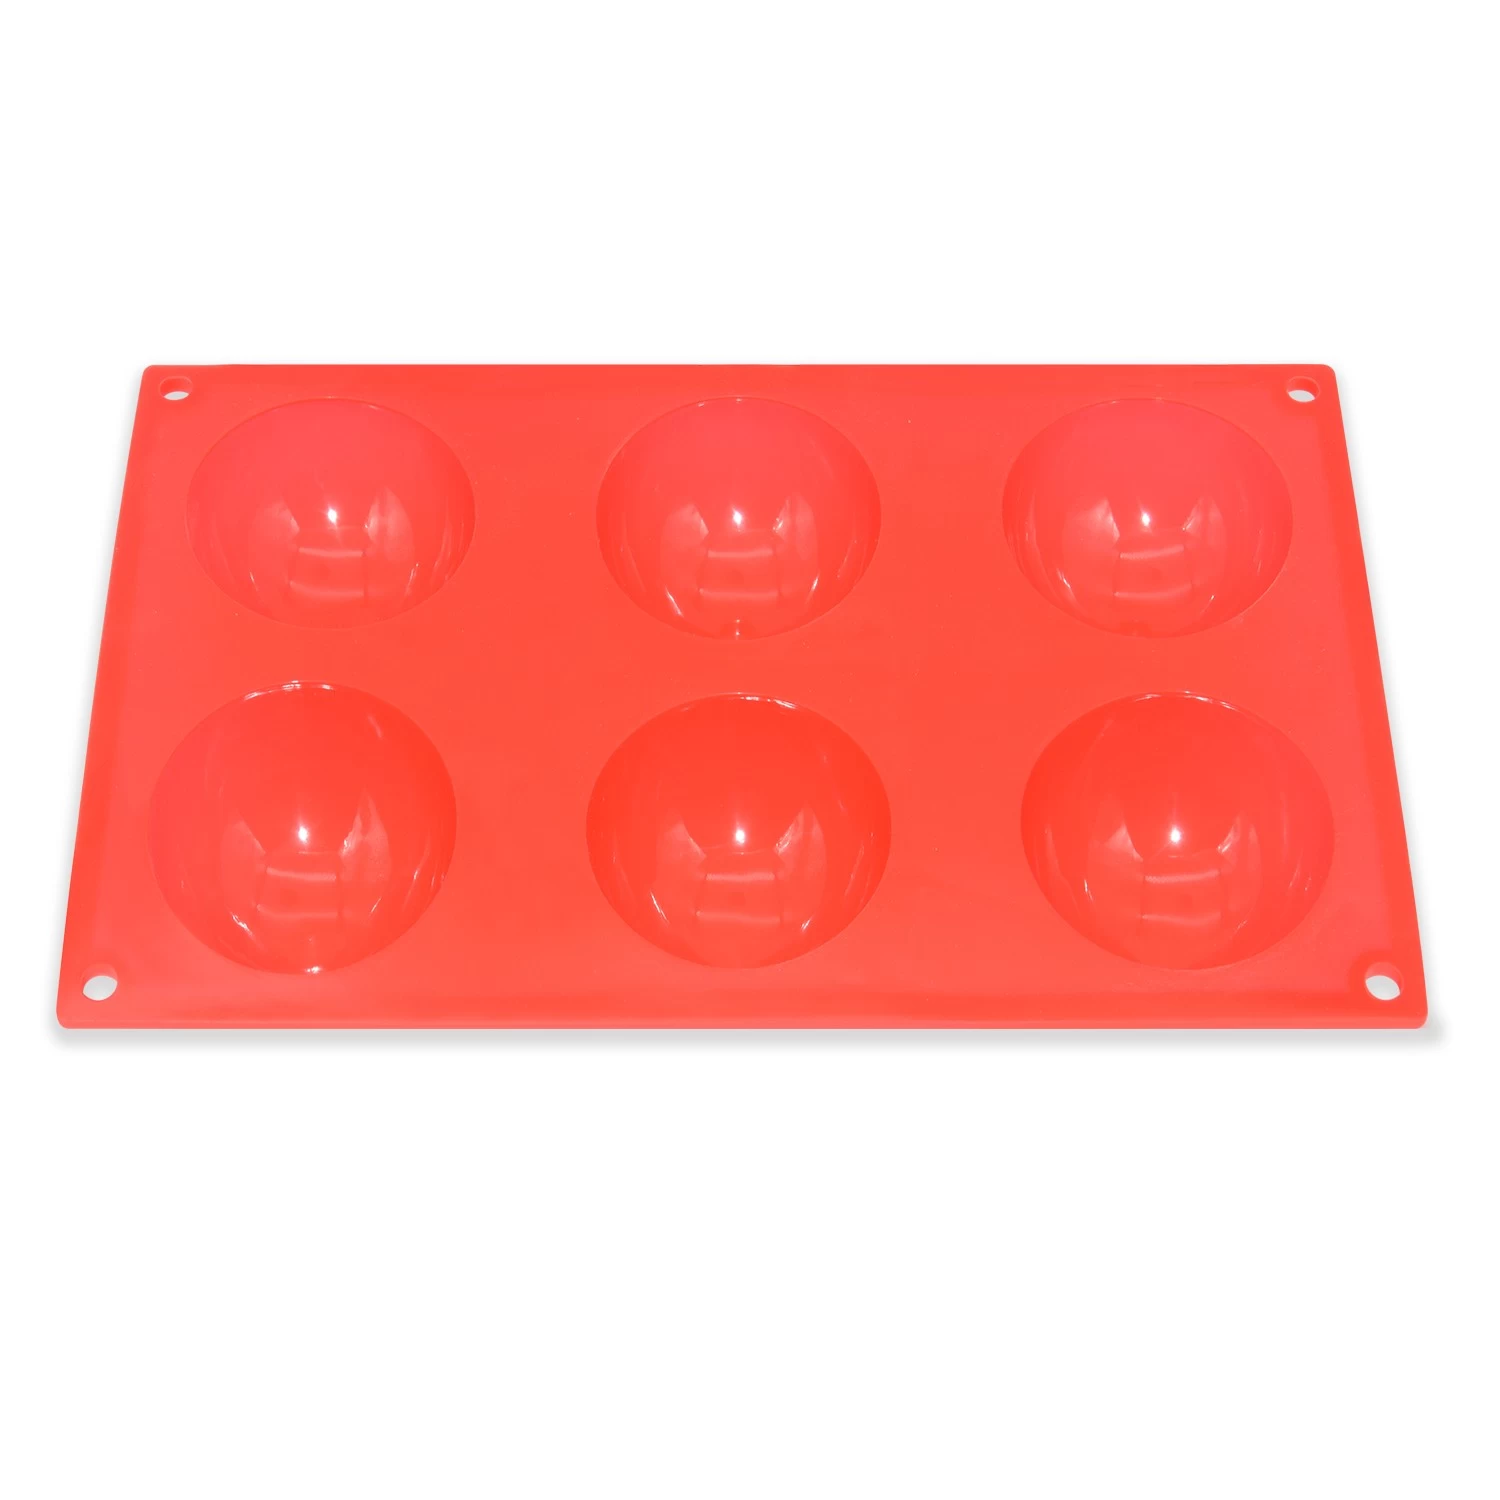 BHD Sphere Chocolate Silicone Mold 6 Half Rebound Circle Holes Silicone Baking Mold for Making Hot Chocolate Bomb